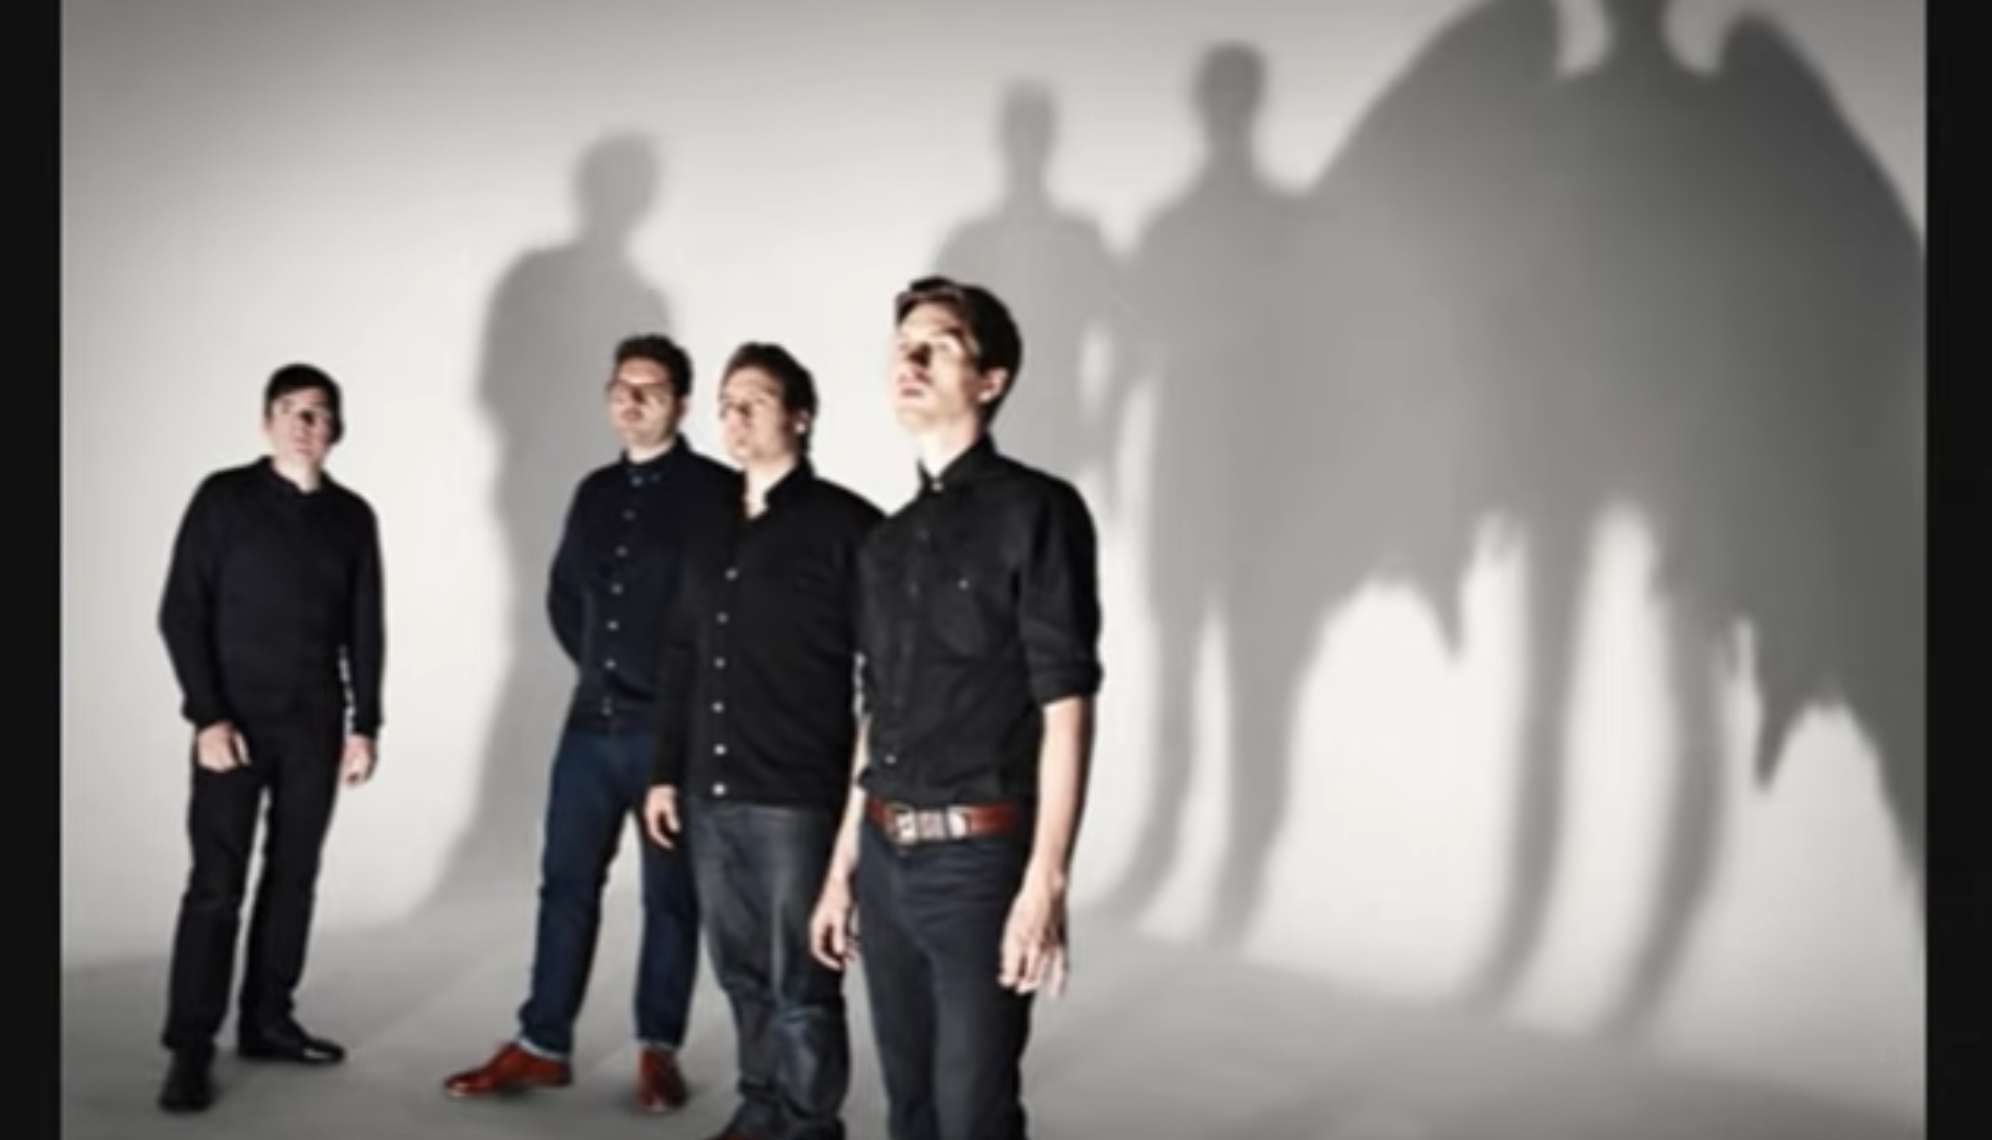 Athlete cover for chances showing the band standing in front of a white wall.